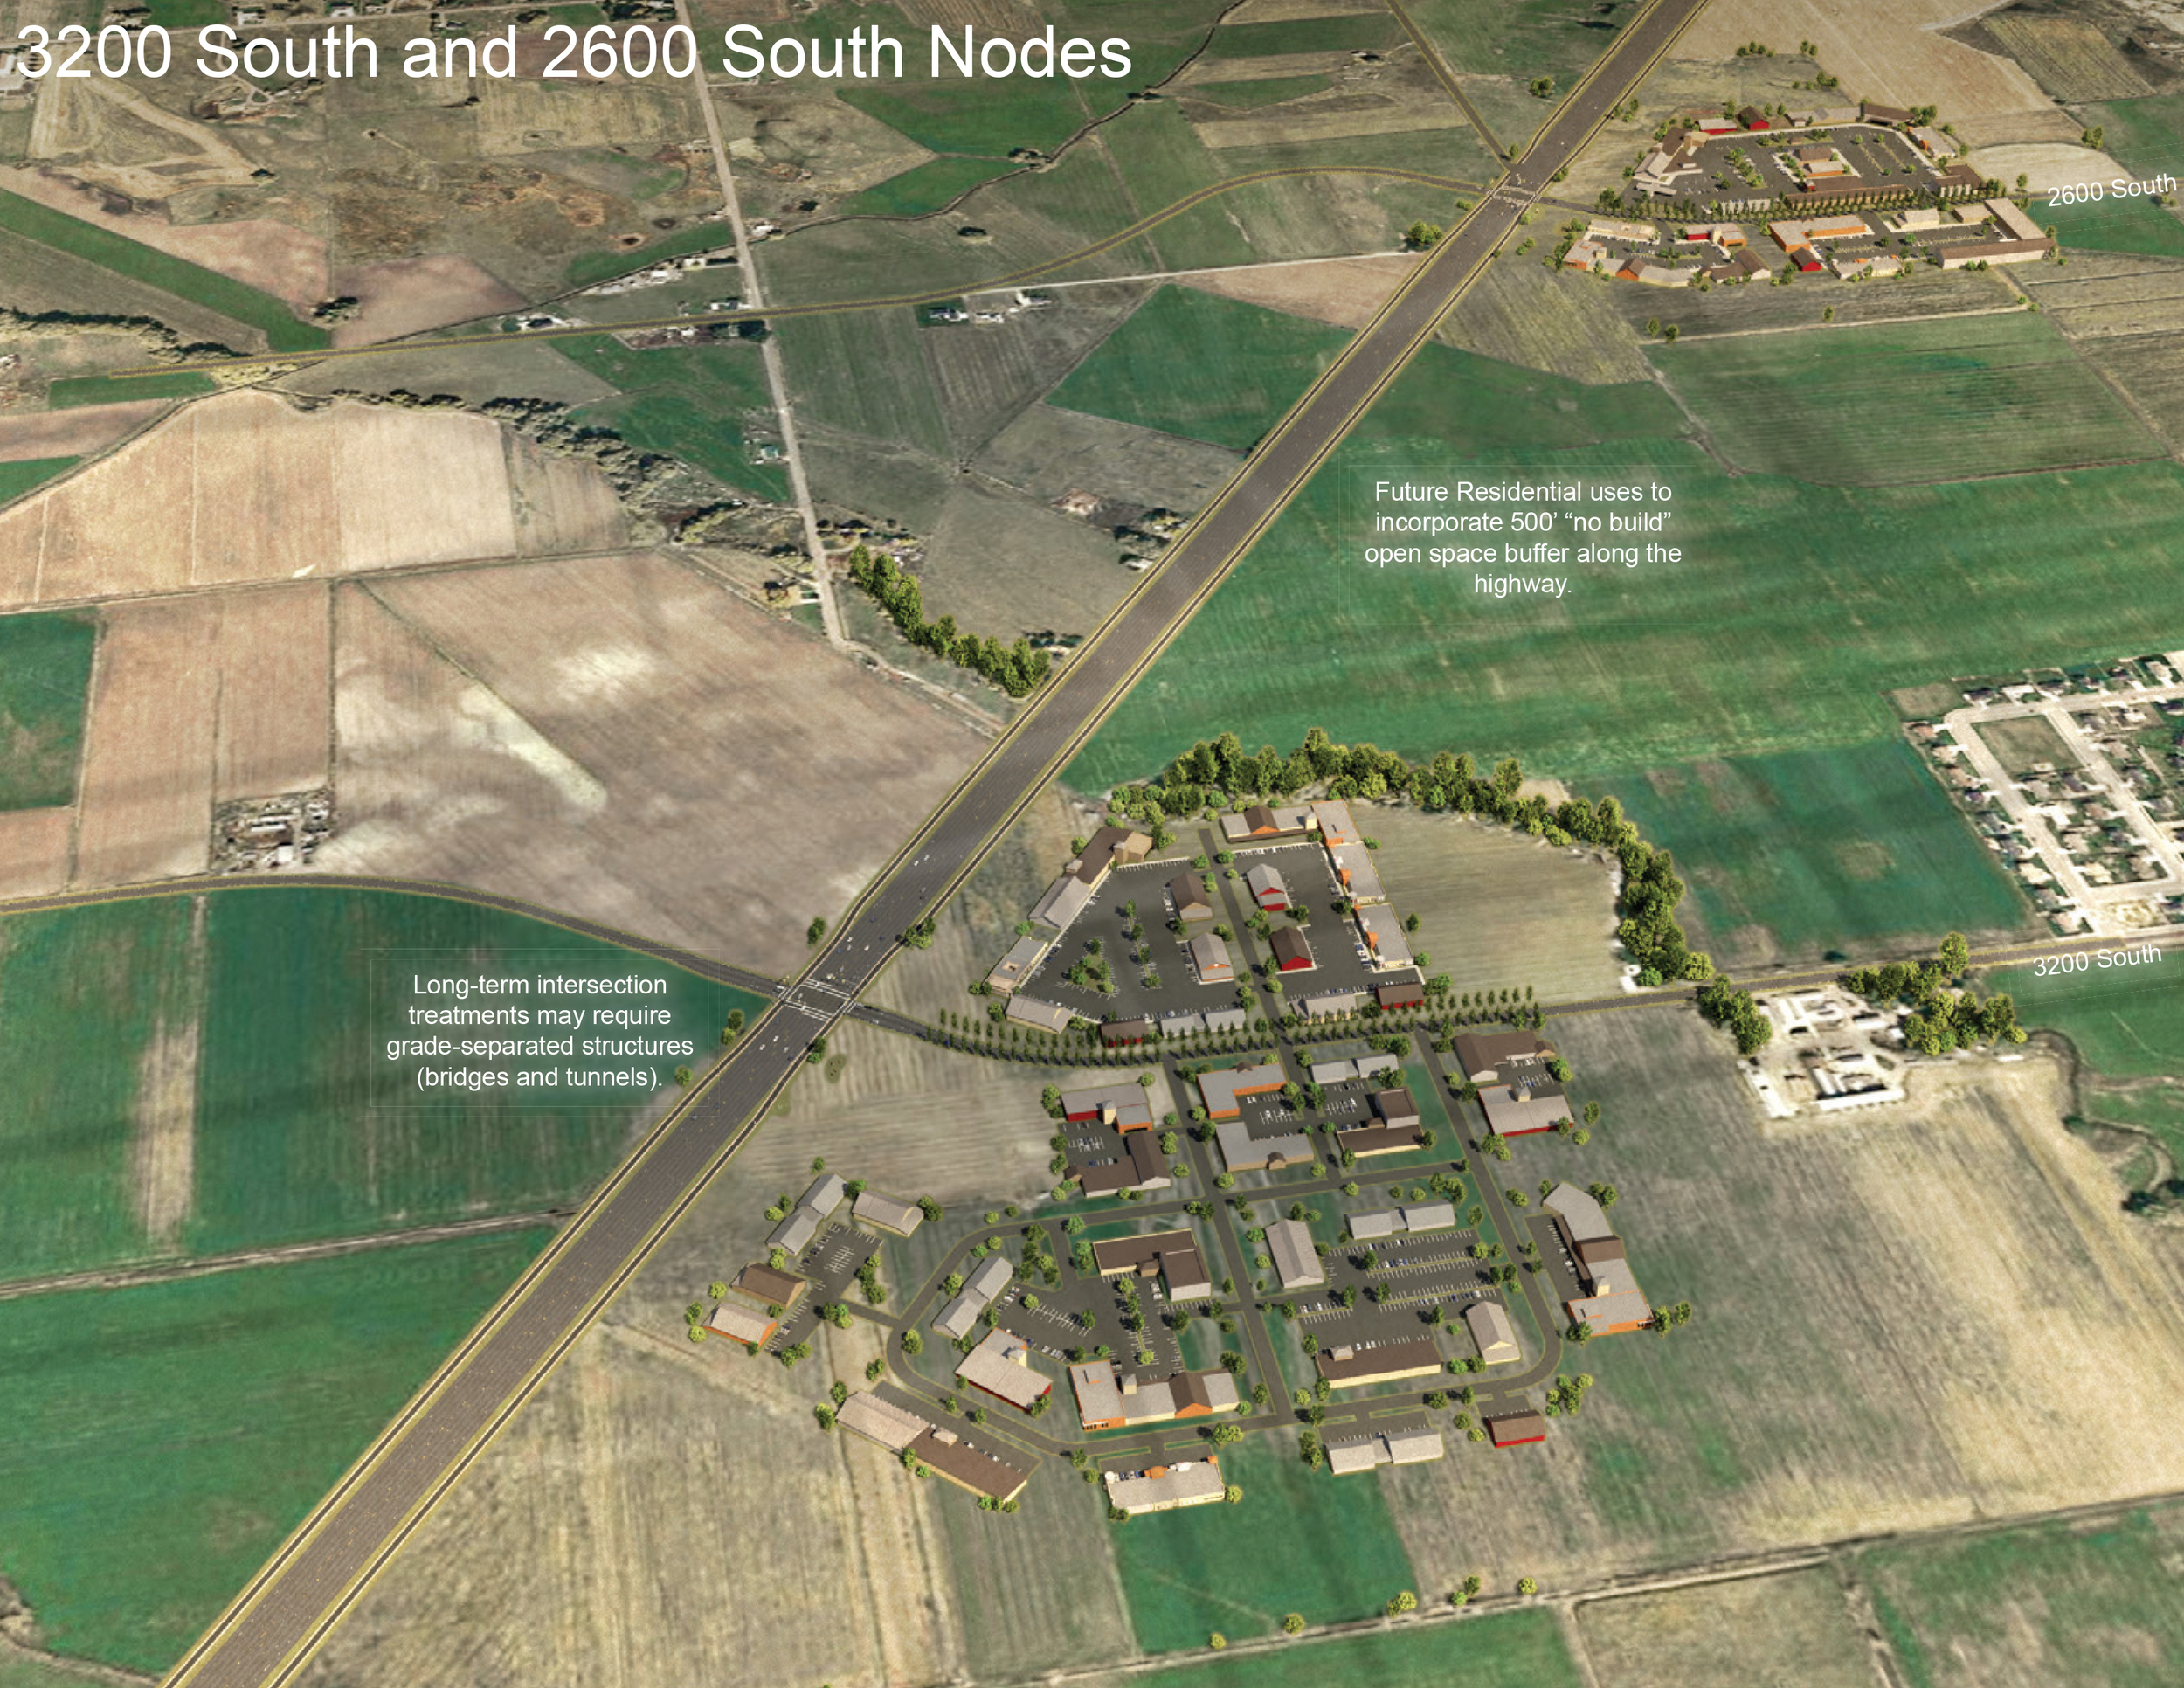 Sparano Mooney Architecture_Project Planning_Cache Valley Corridor Master Plan_3200s and 2600Node.jpg